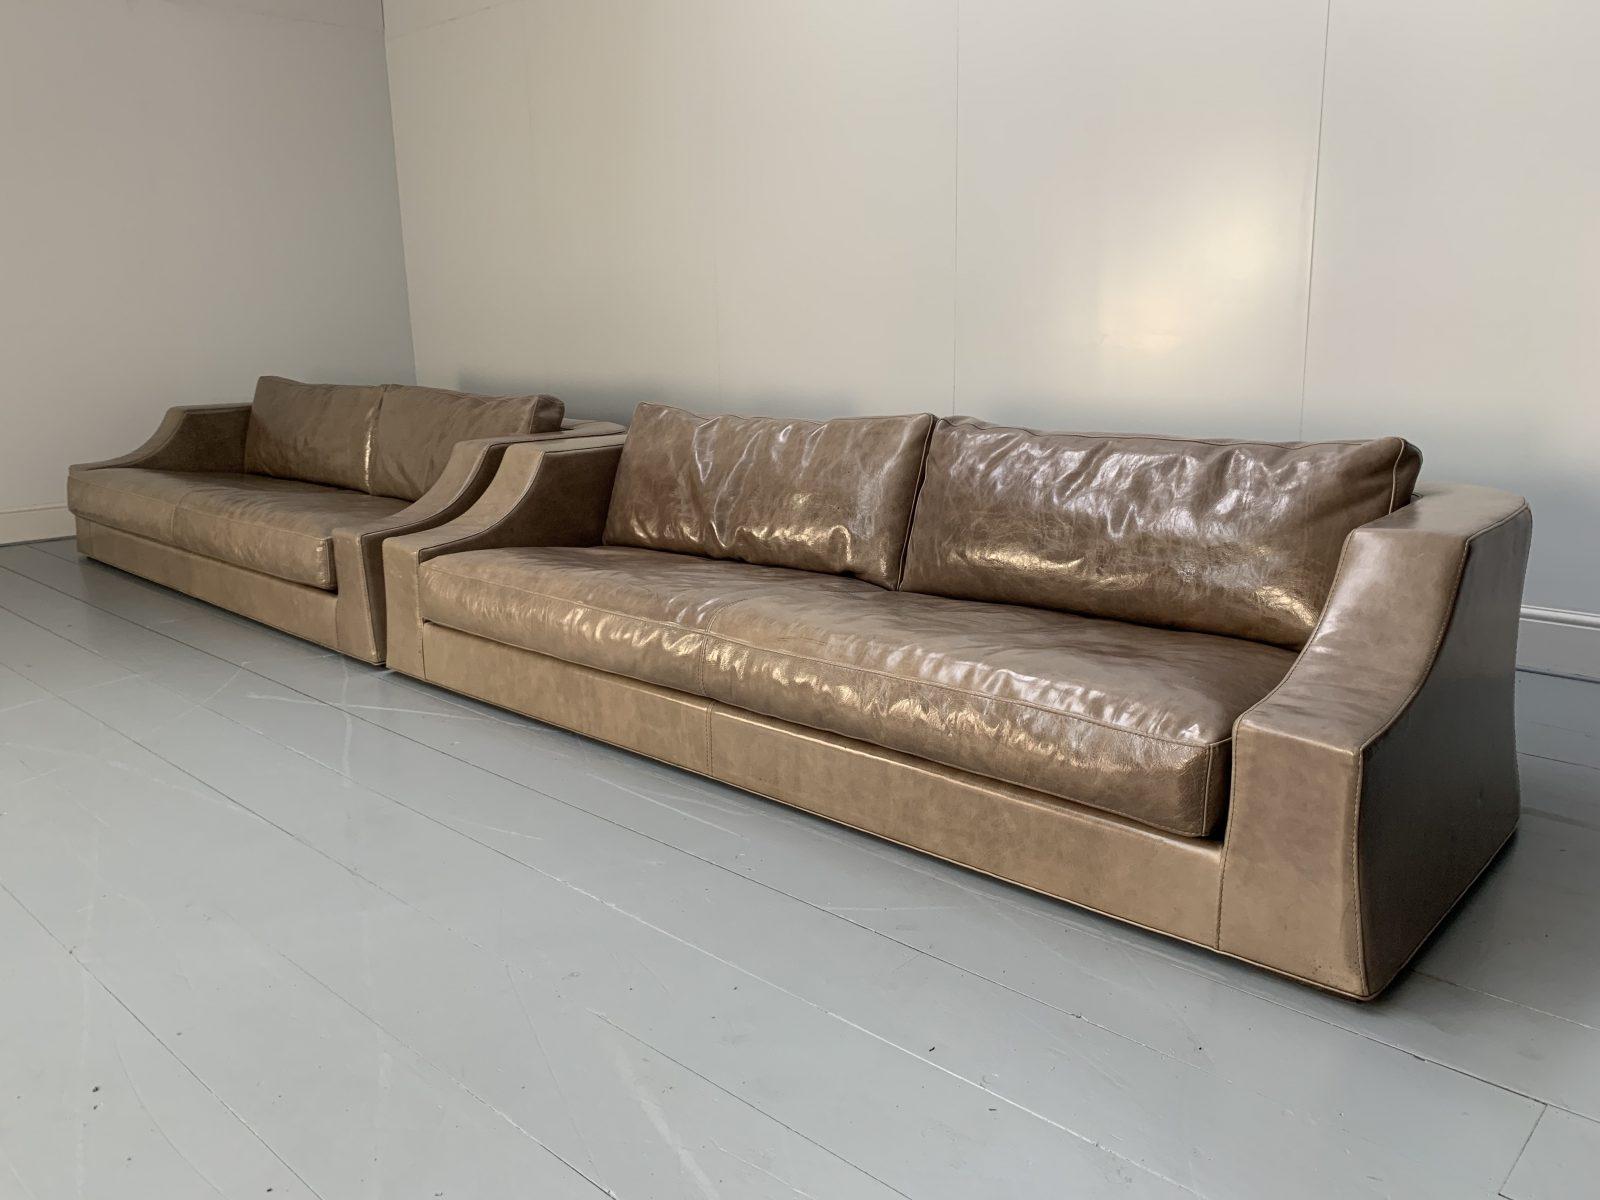 This is a spectacular, rare identical pair of 4-seat sofas from the world renown Italian furniture house of Baxter, dressed in a sublime cream “Tuscany Cetona” leather.

In a world of temporary pleasures, Baxter create beautiful furniture that